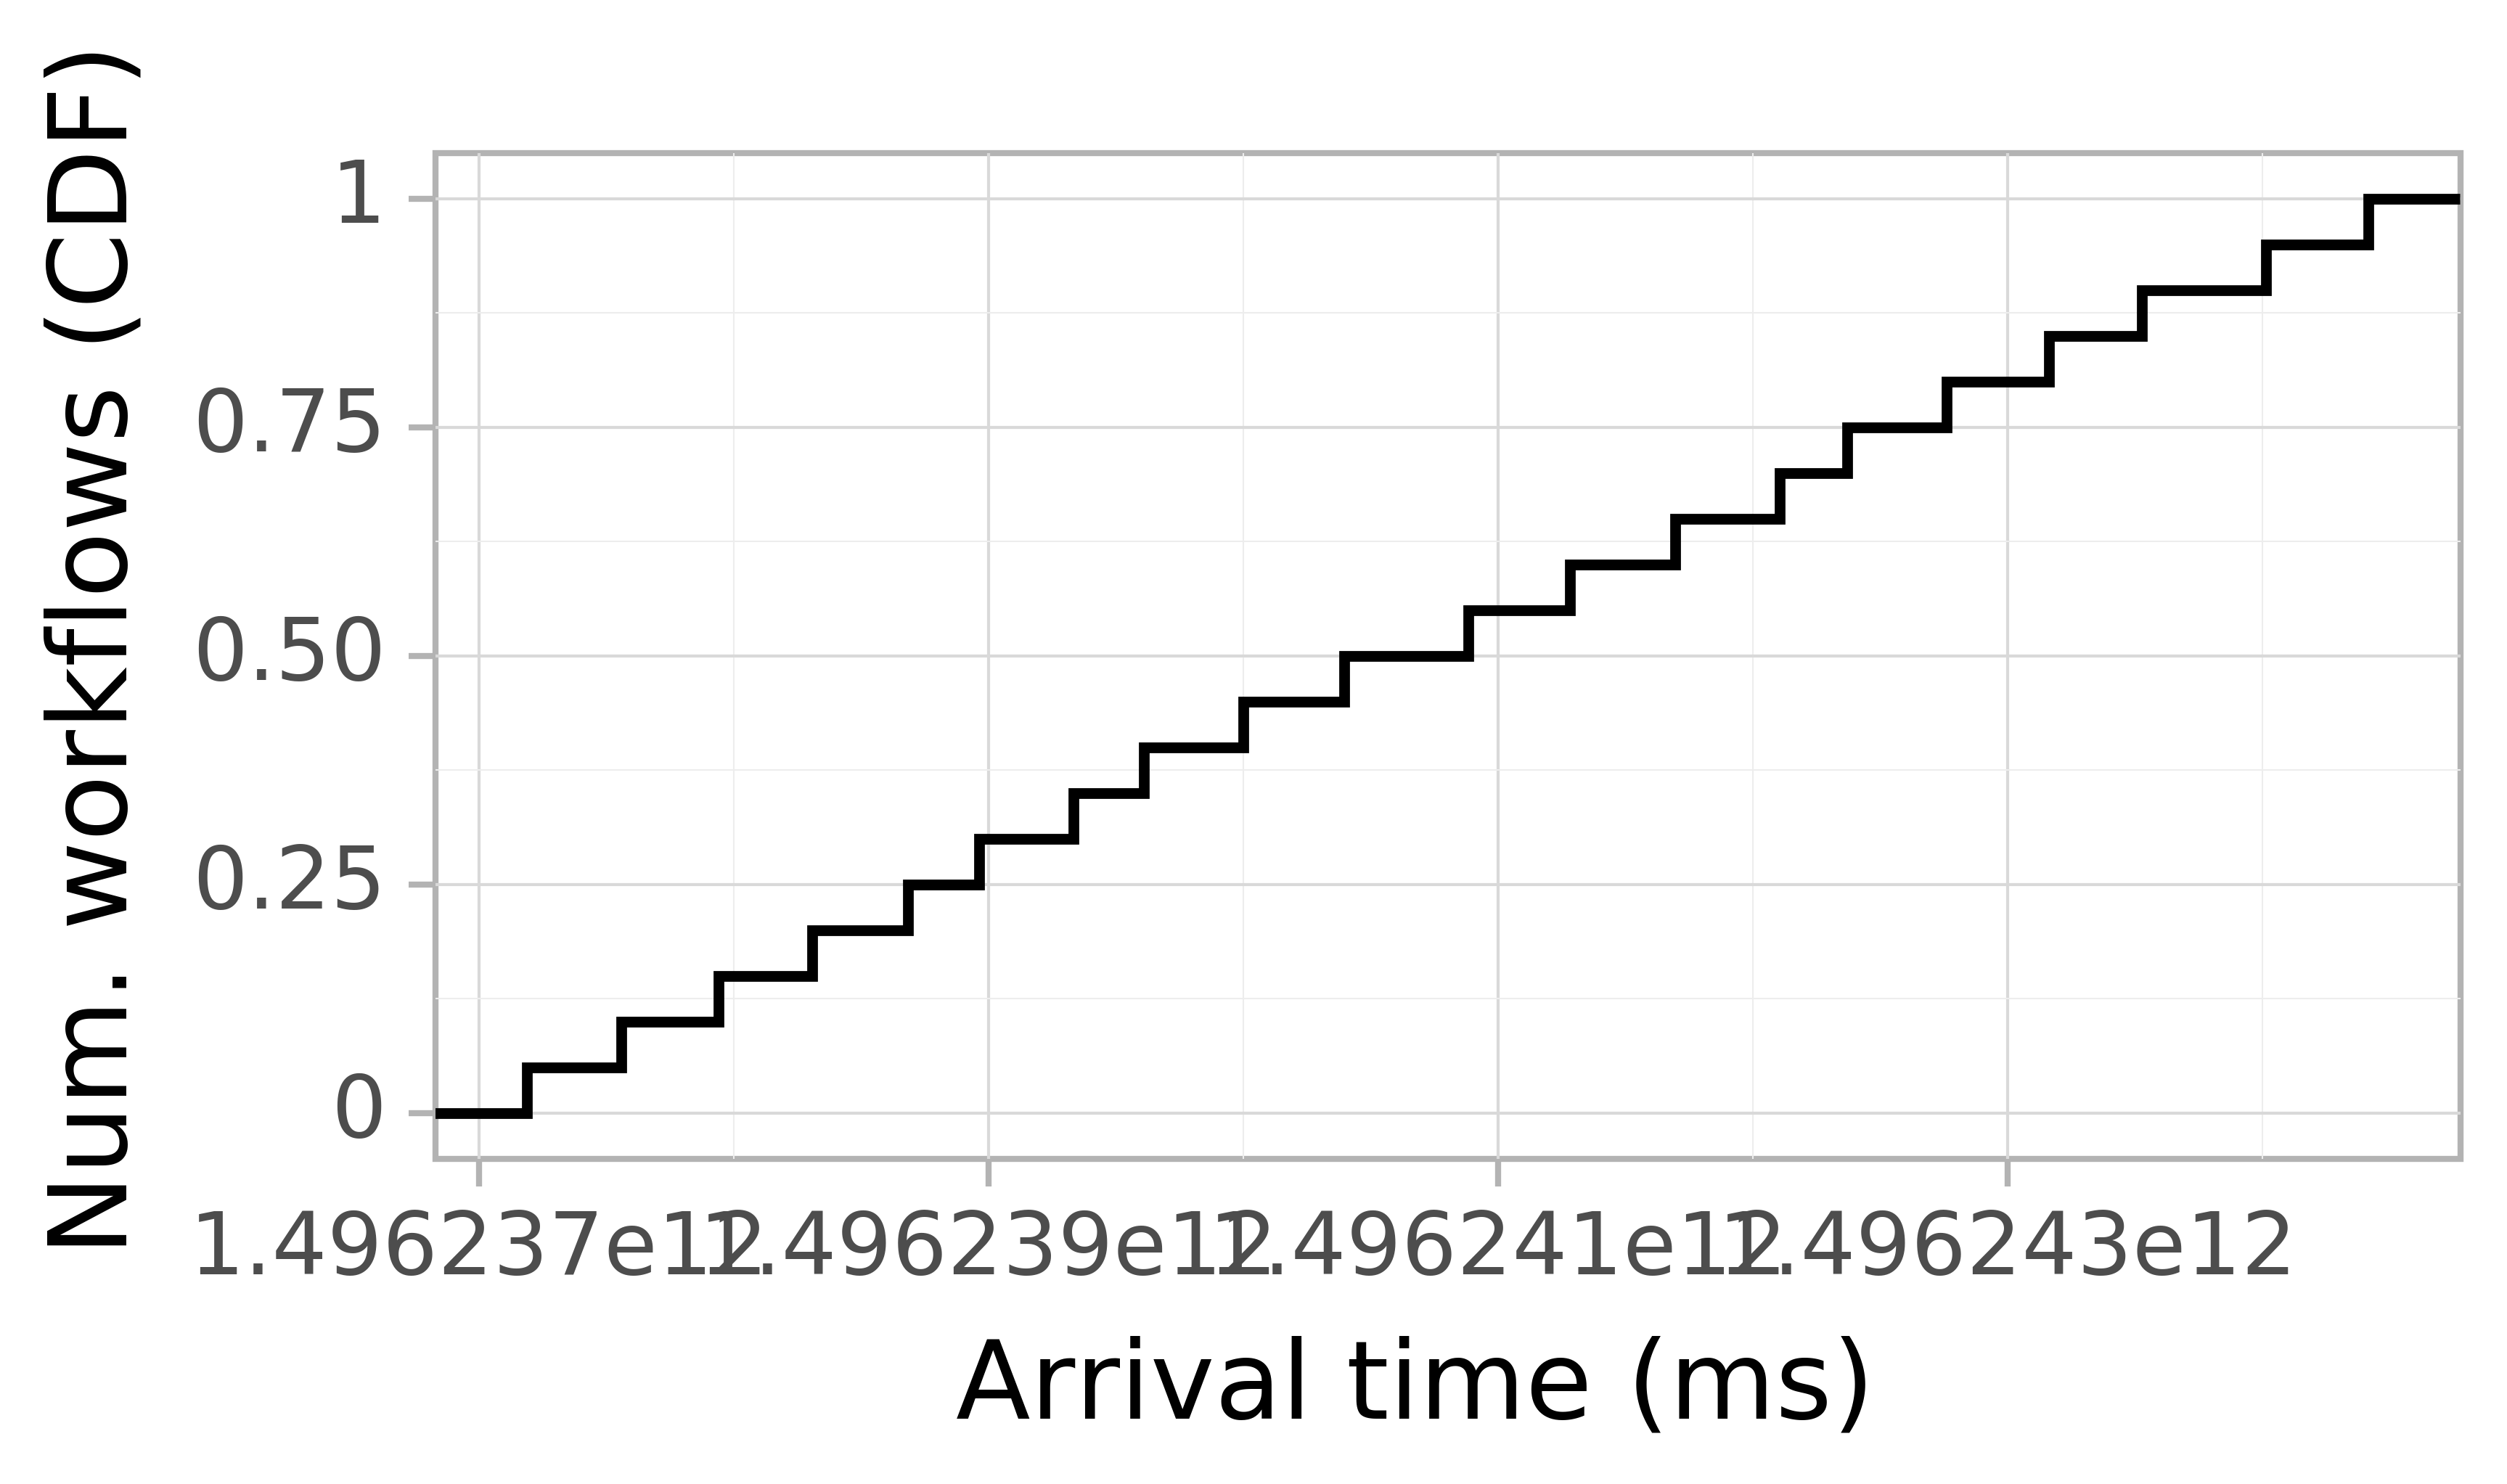 Job arrival CDF graph for the askalon-new_ee67 trace.